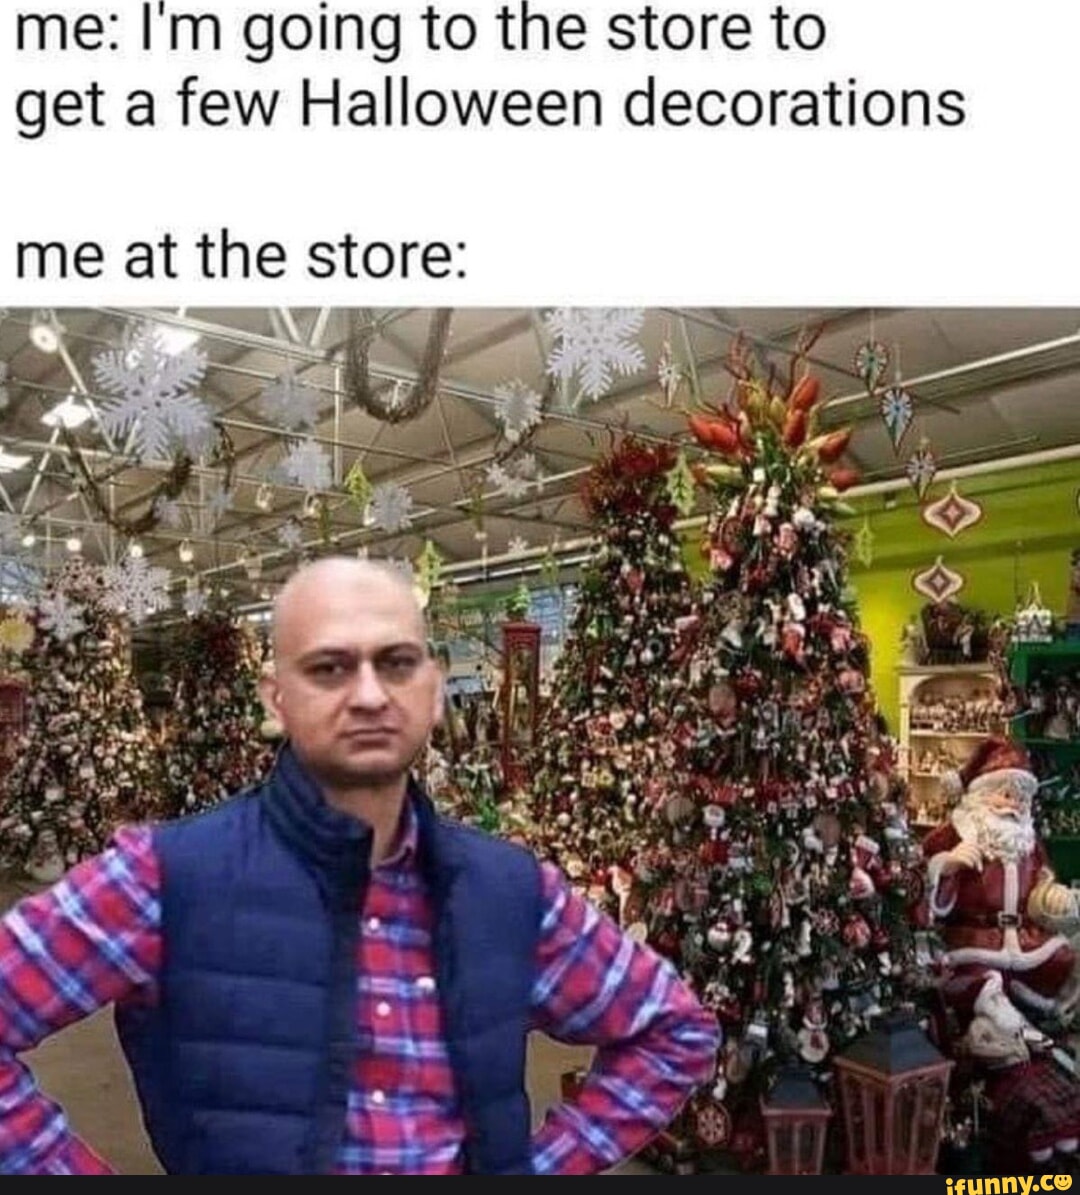 Me: going to the store to get a few Halloween decorations me at ...